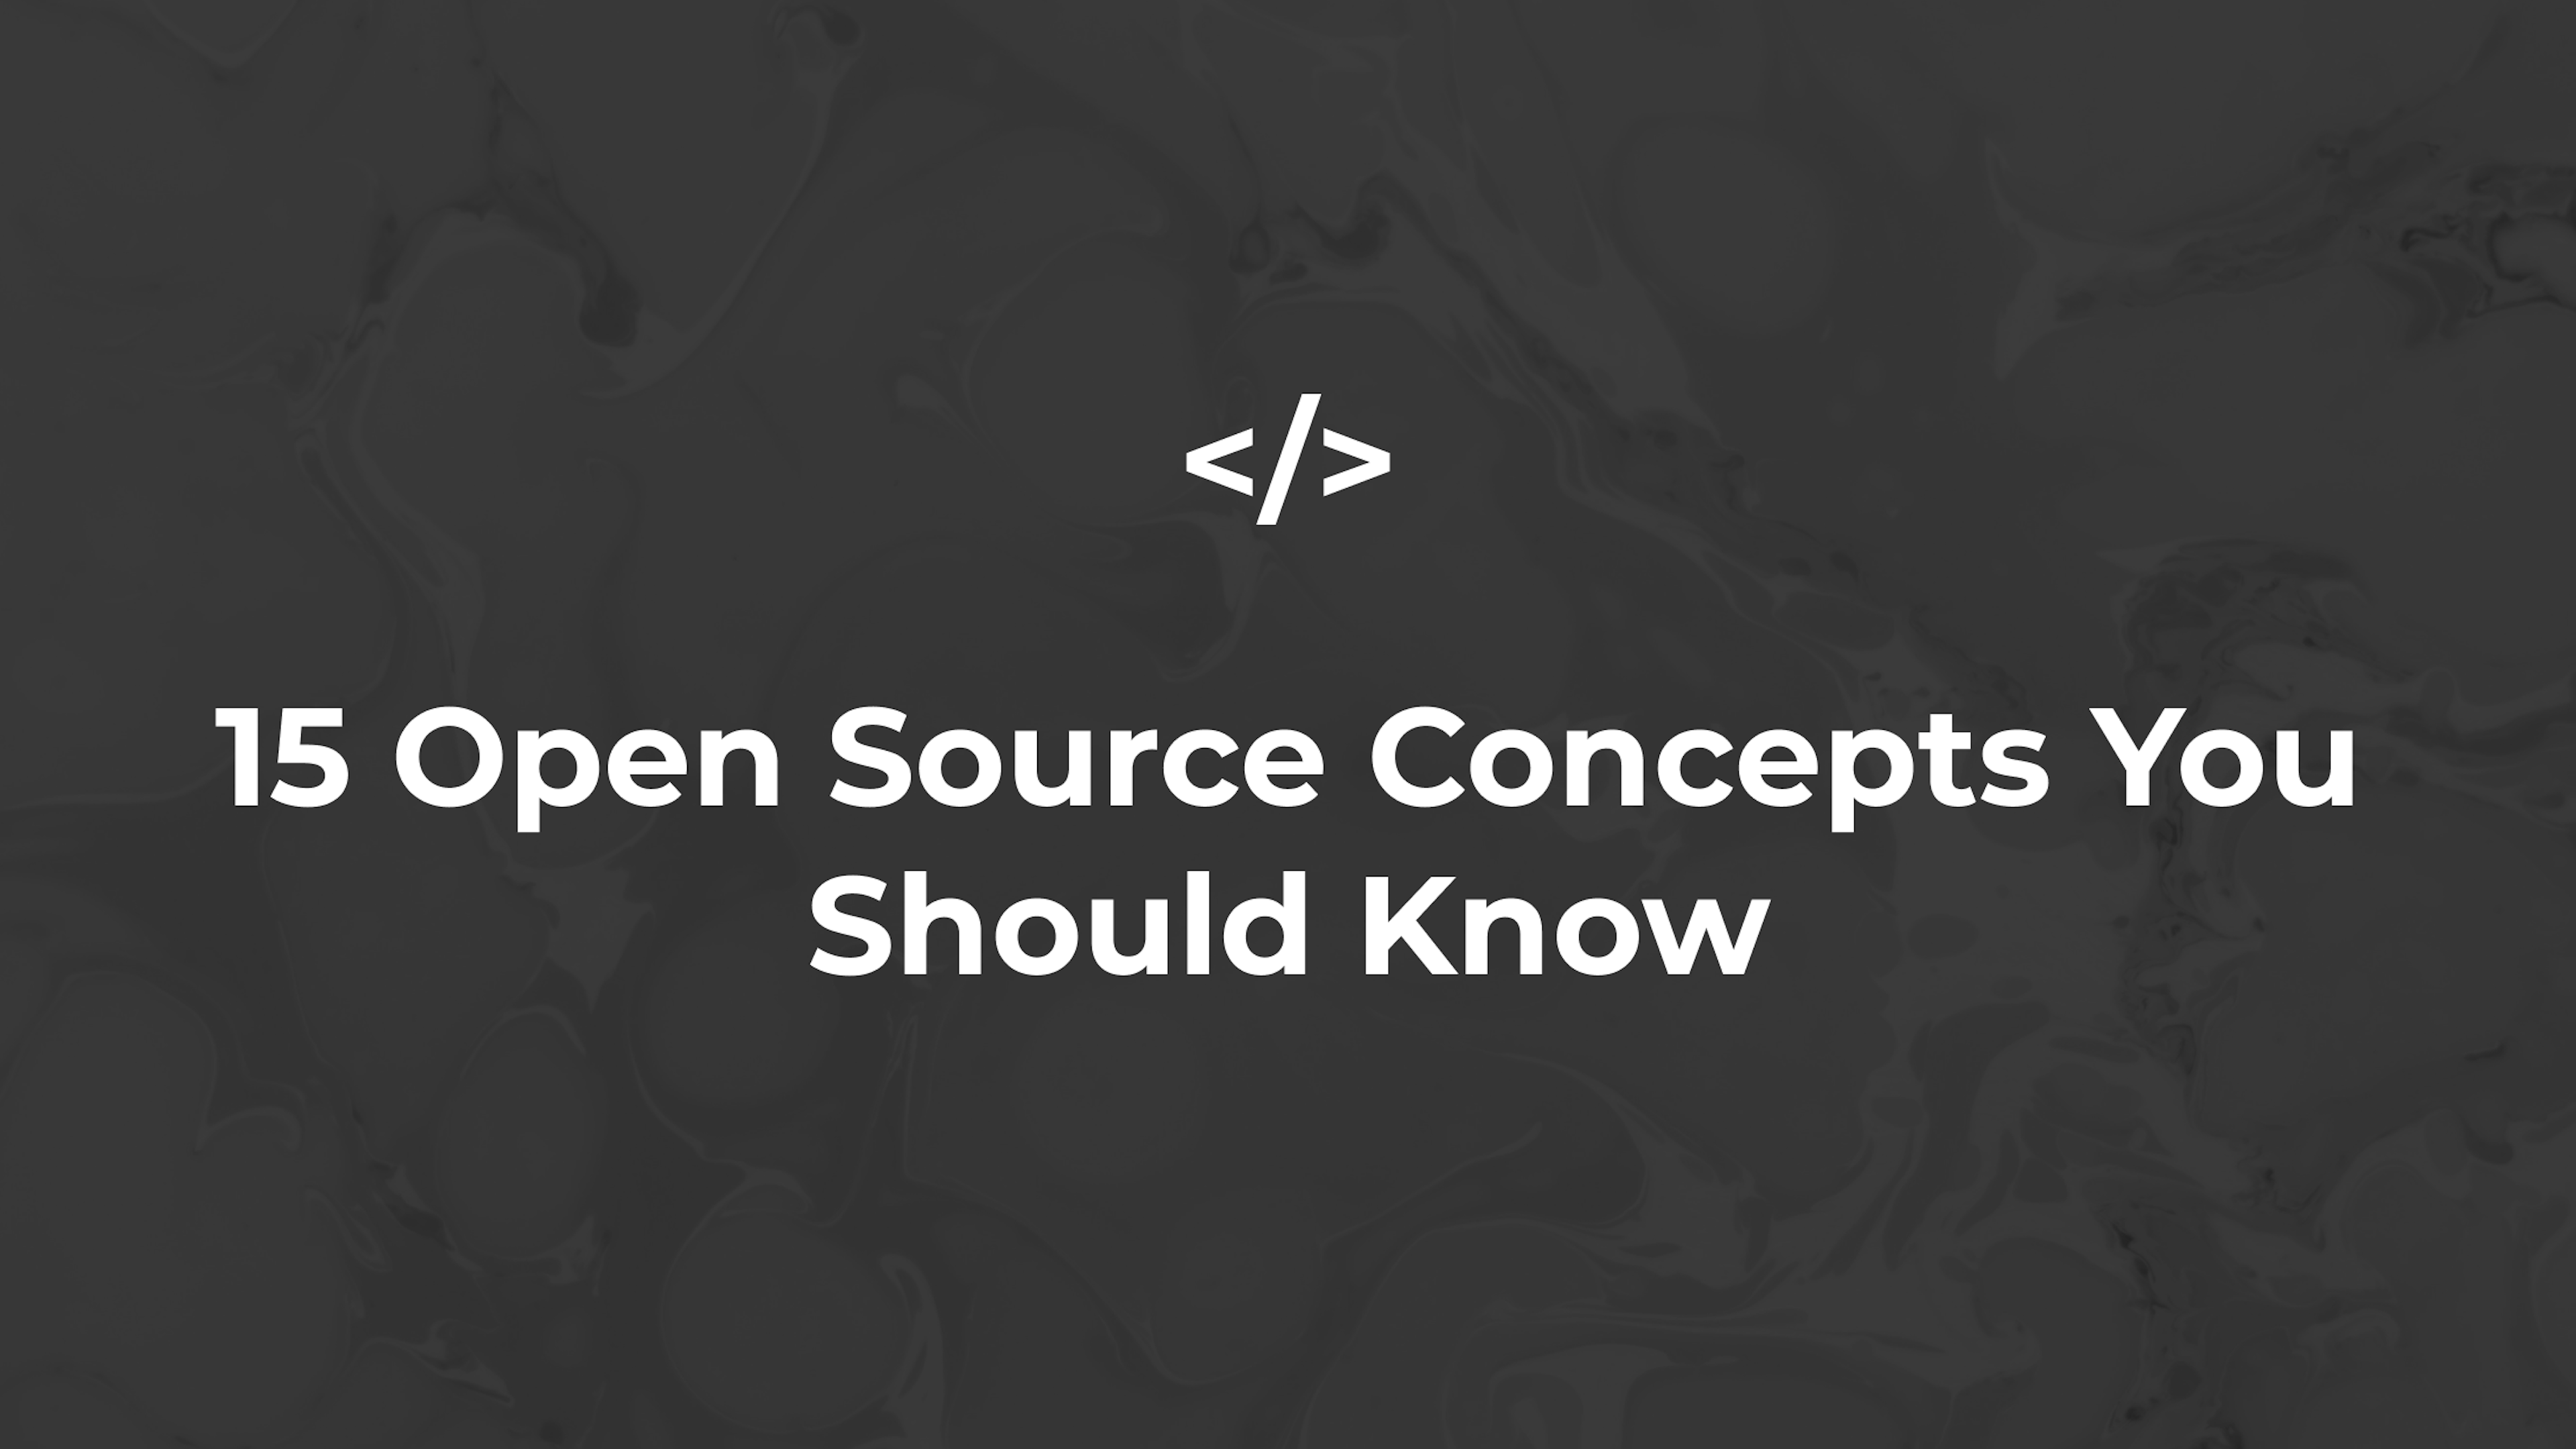 15 Open Source Concepts You Should Know